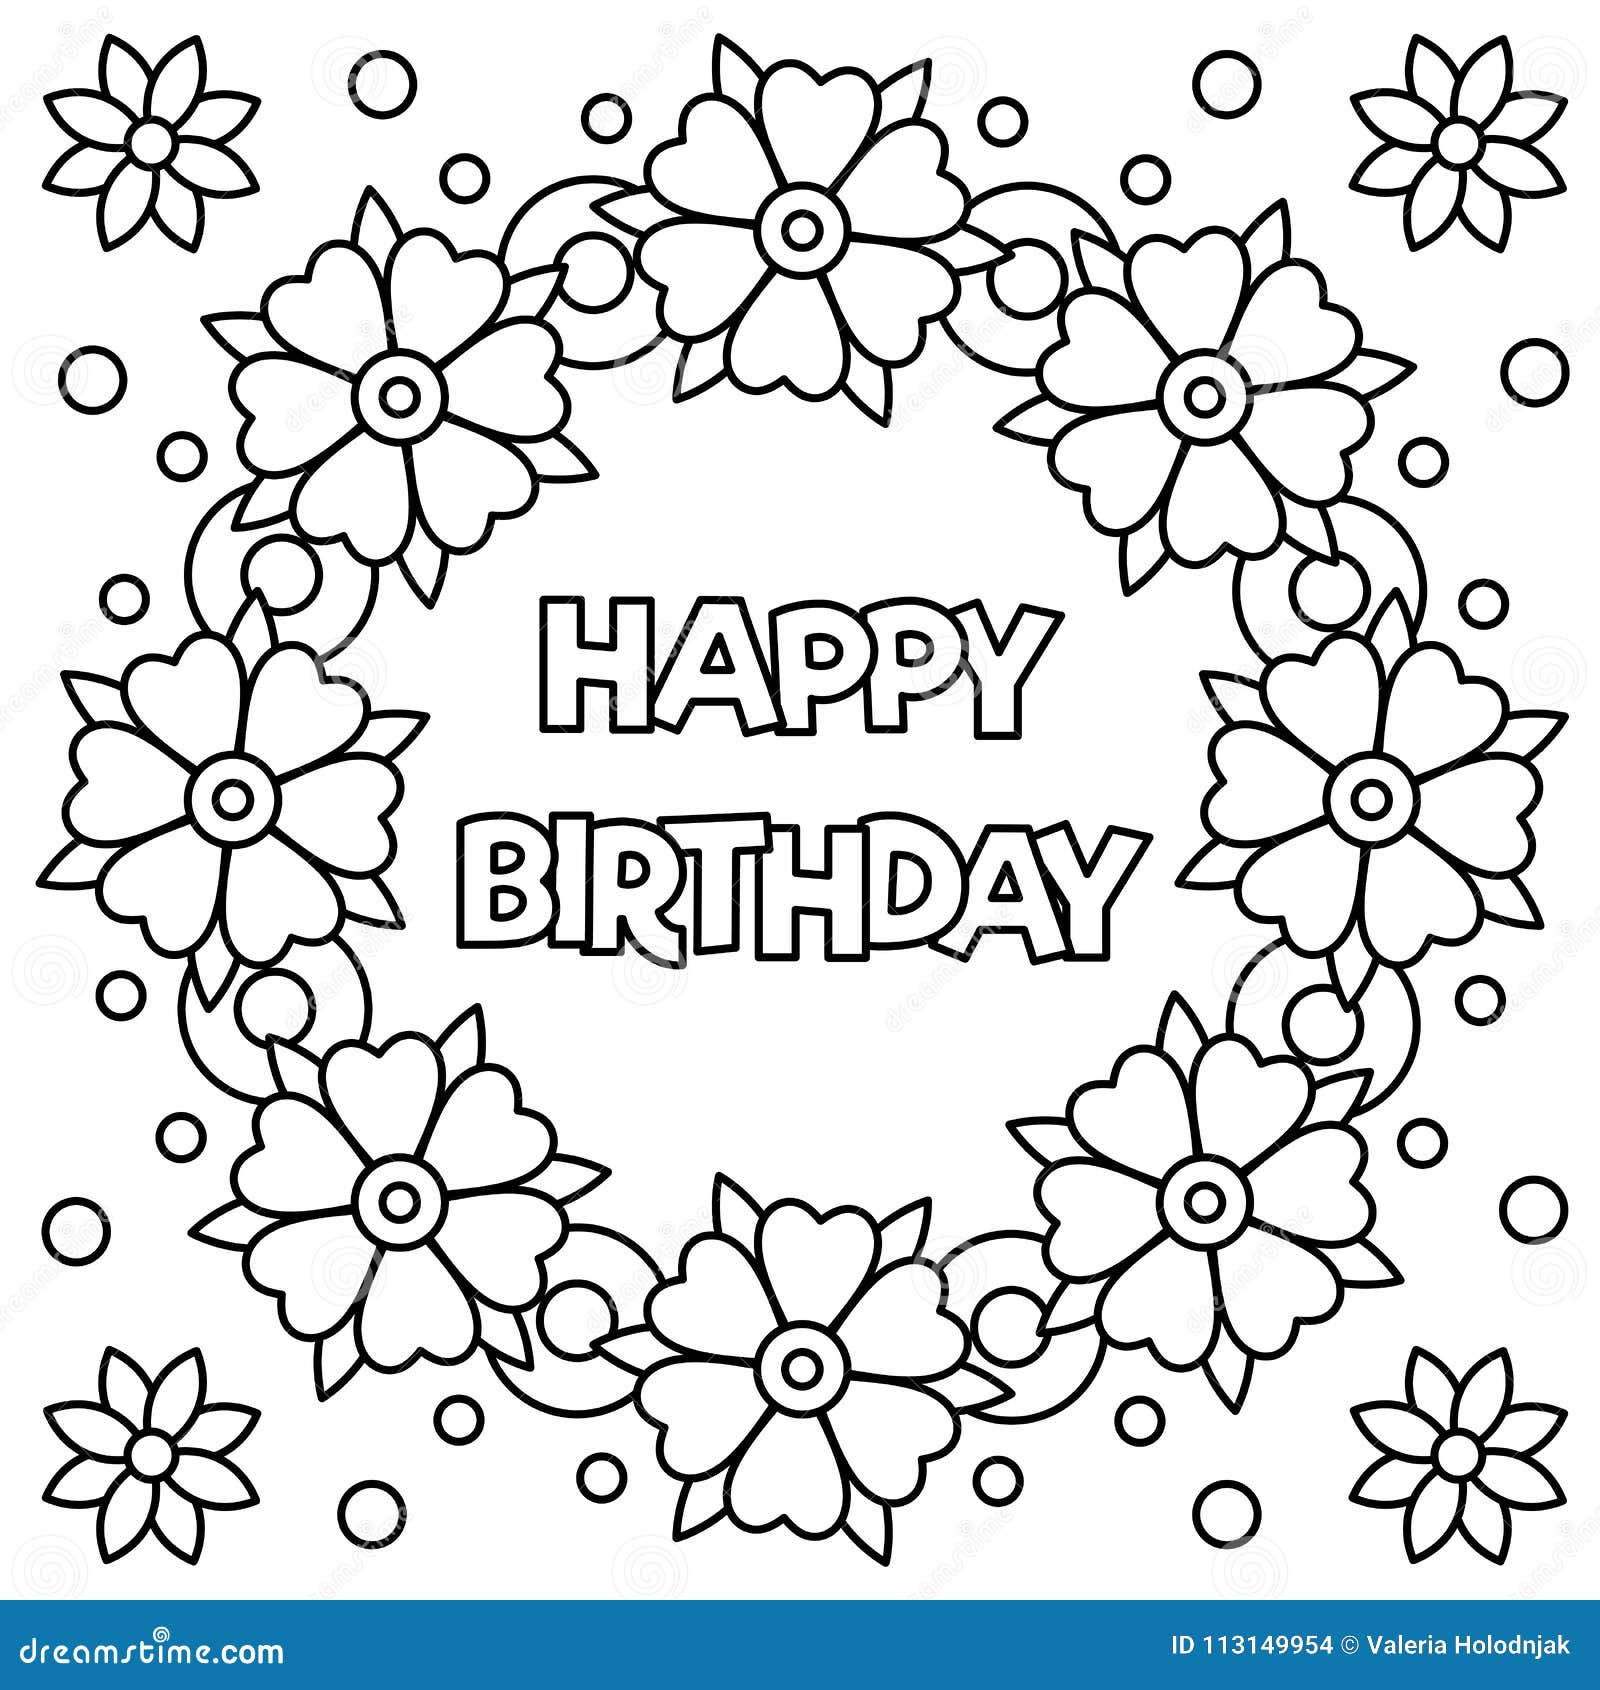 Download Floral Wreath. Coloring Page. Vector Illustration. Stock Vector - Illustration of outline, white ...